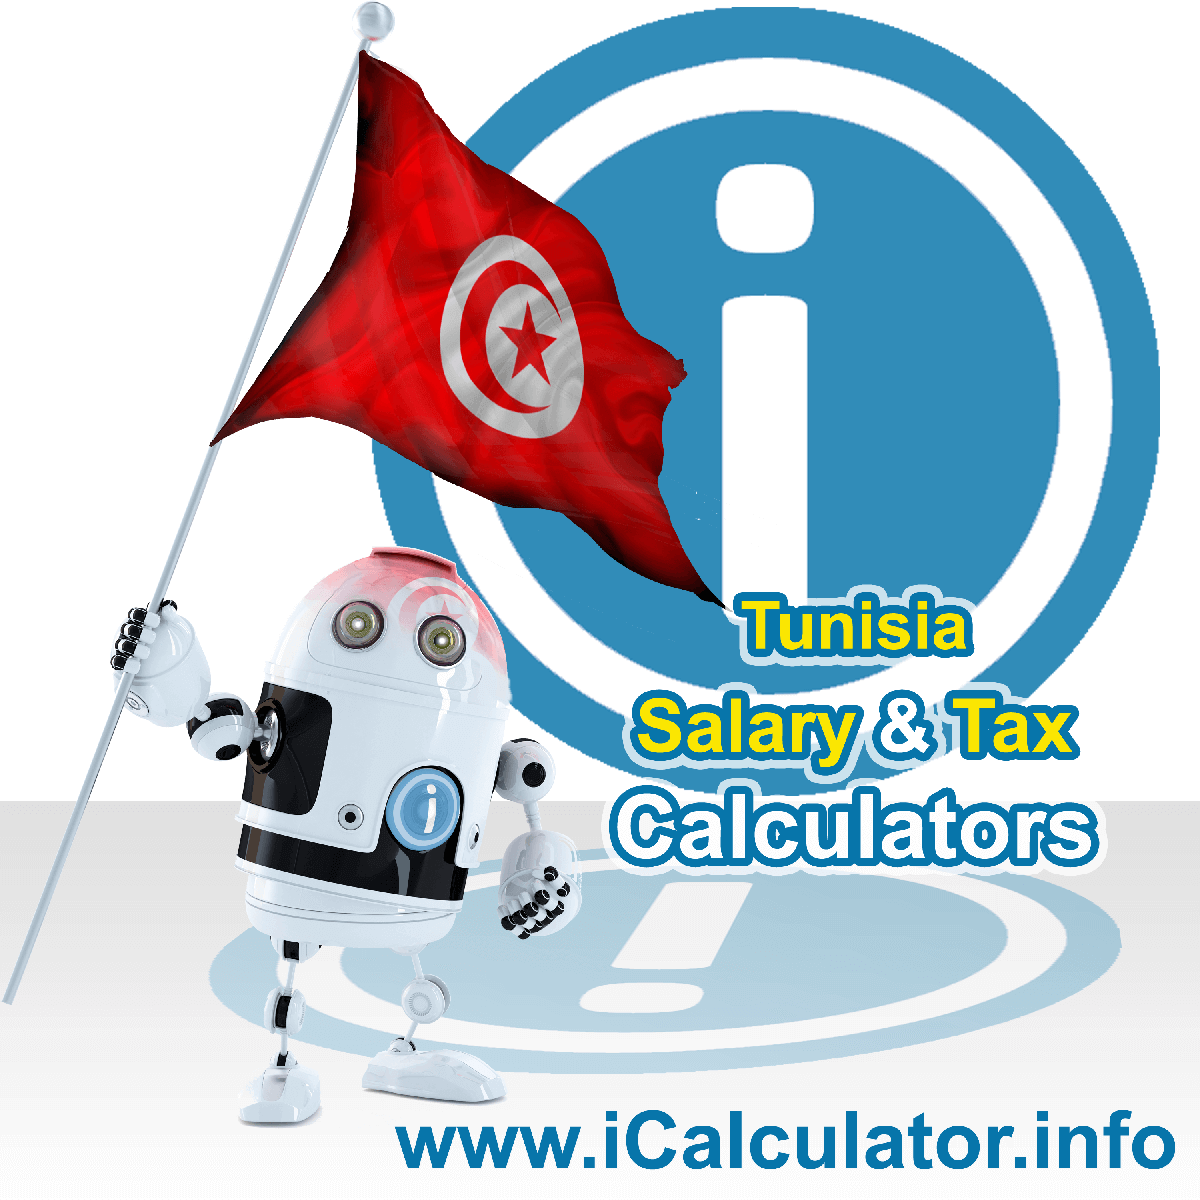 Tunisia Salary Calculator. This image shows the Tunisiaese flag and information relating to the tax formula for the Tunisia Tax Calculator